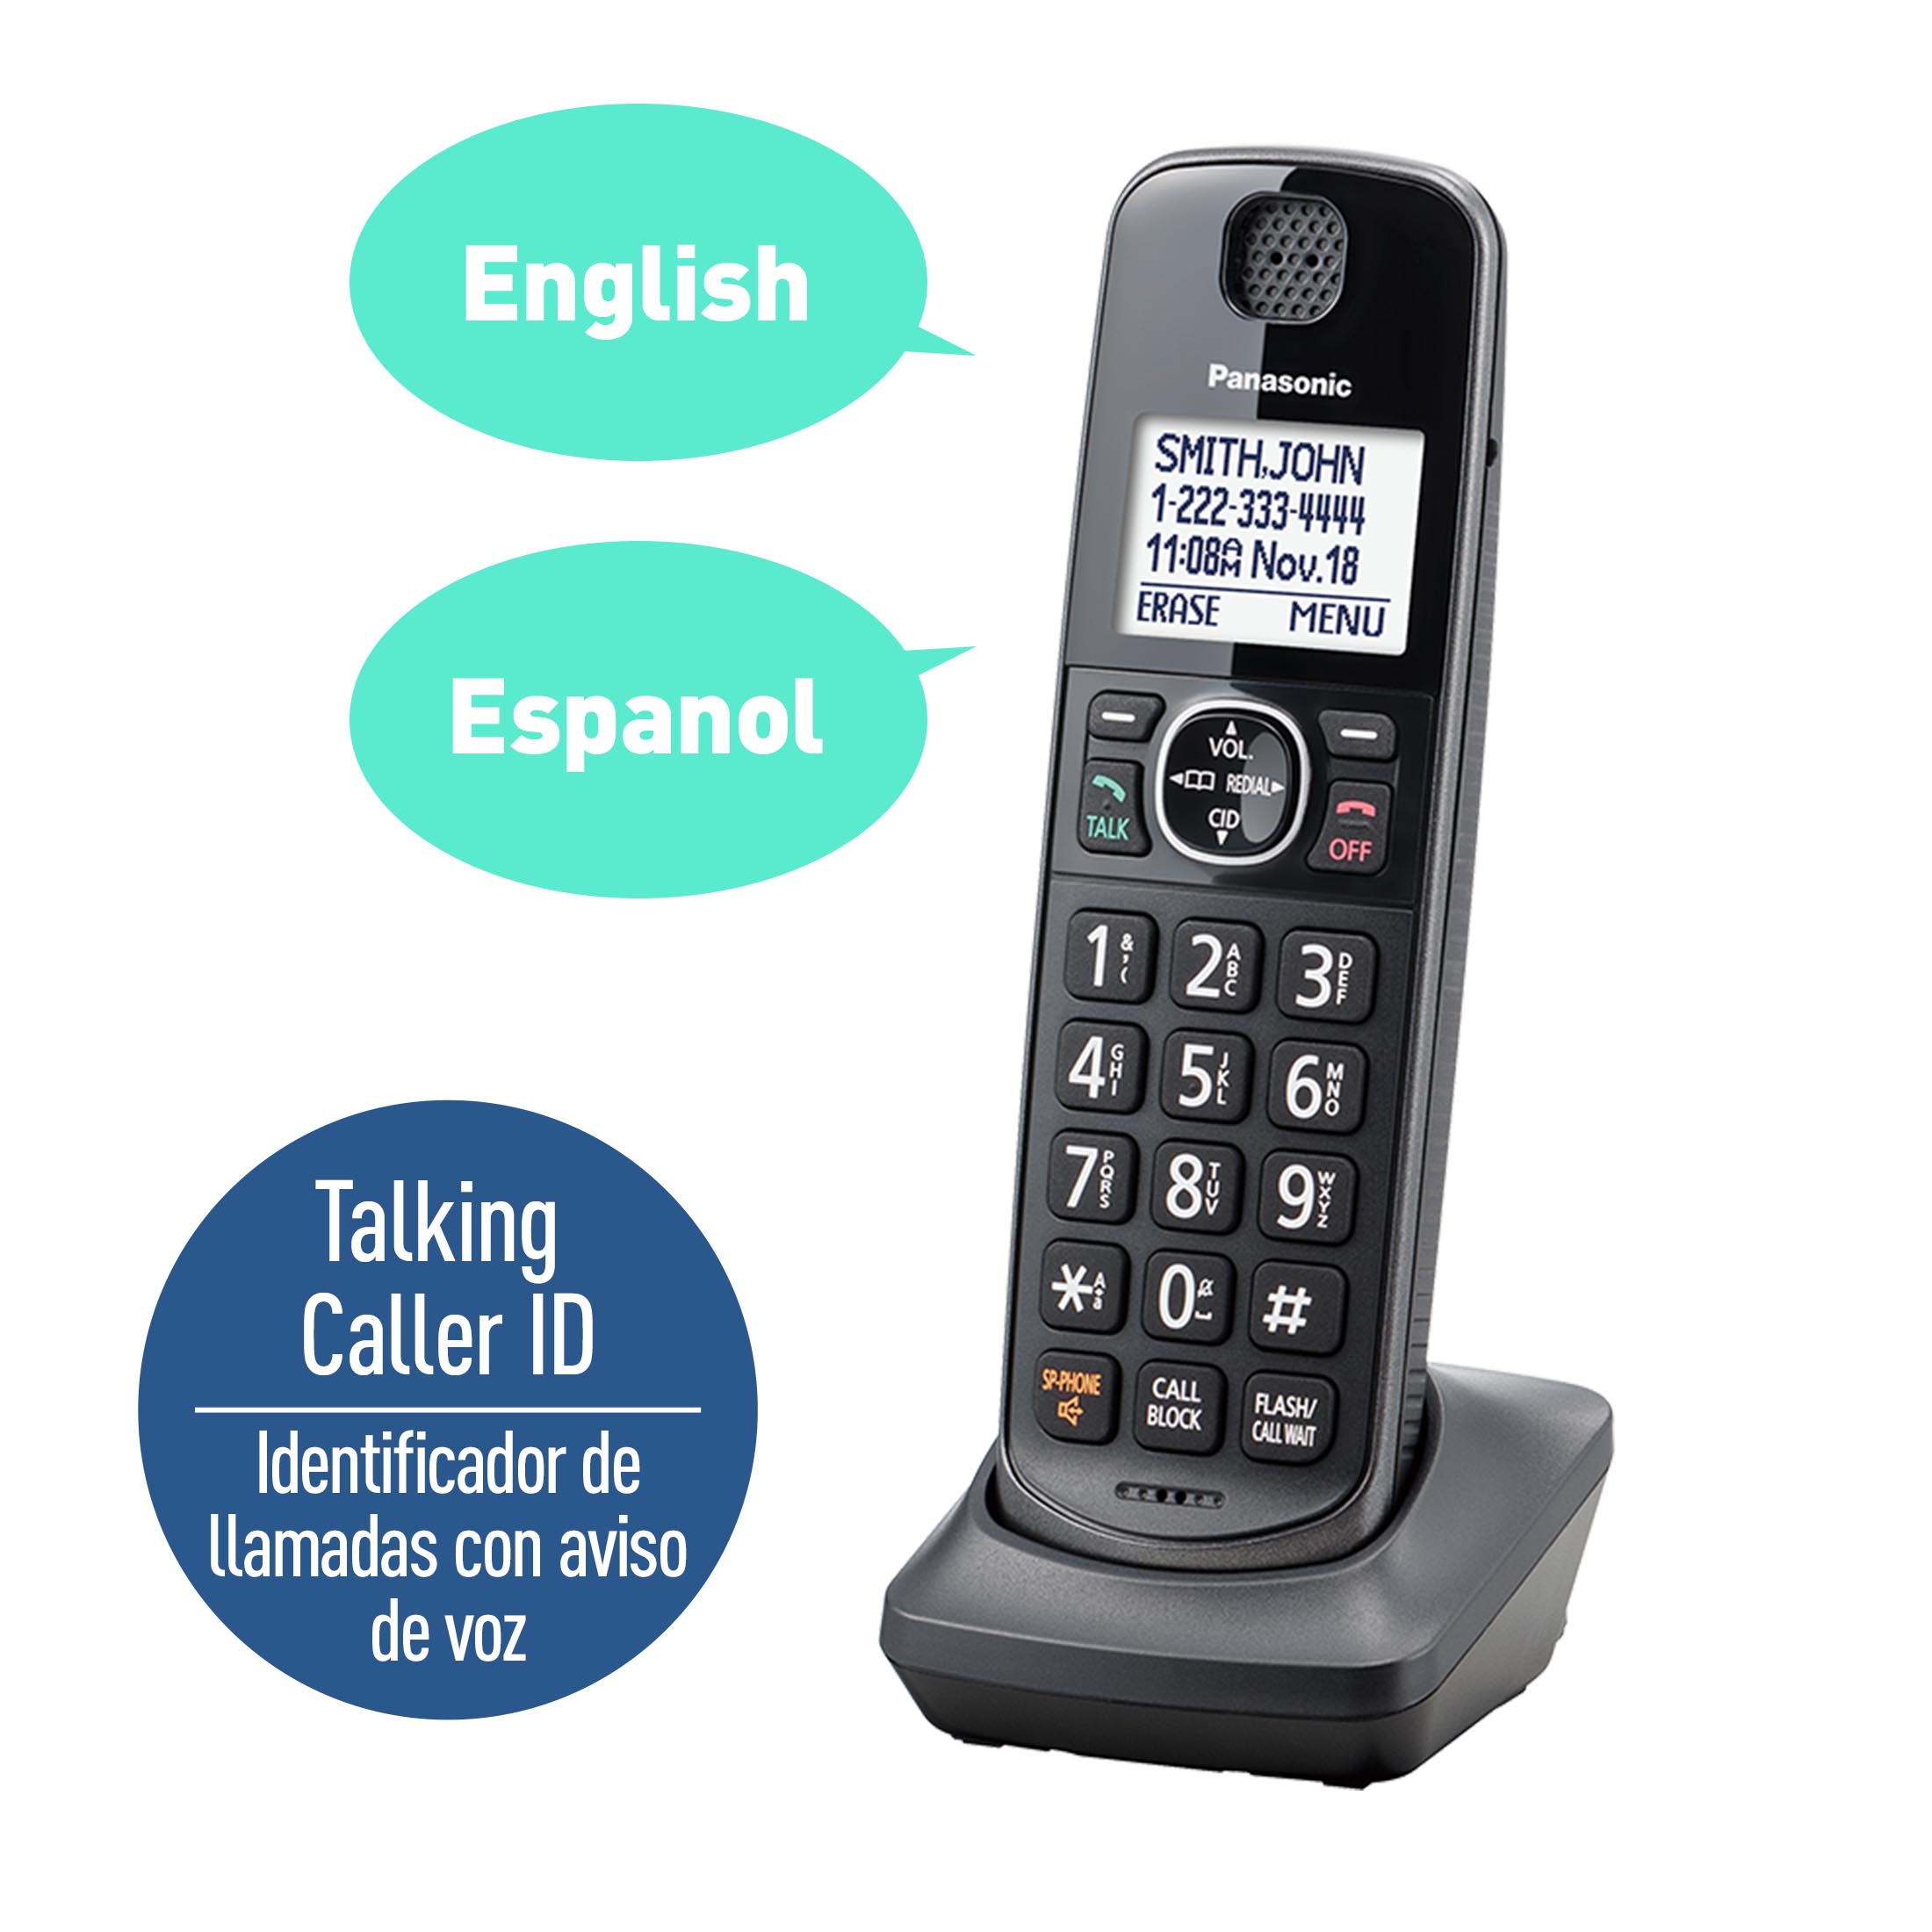 Panasonic 3-Handset Expandable Cordless Phone System with Answering System - KX-TG3833M - image 4 of 9